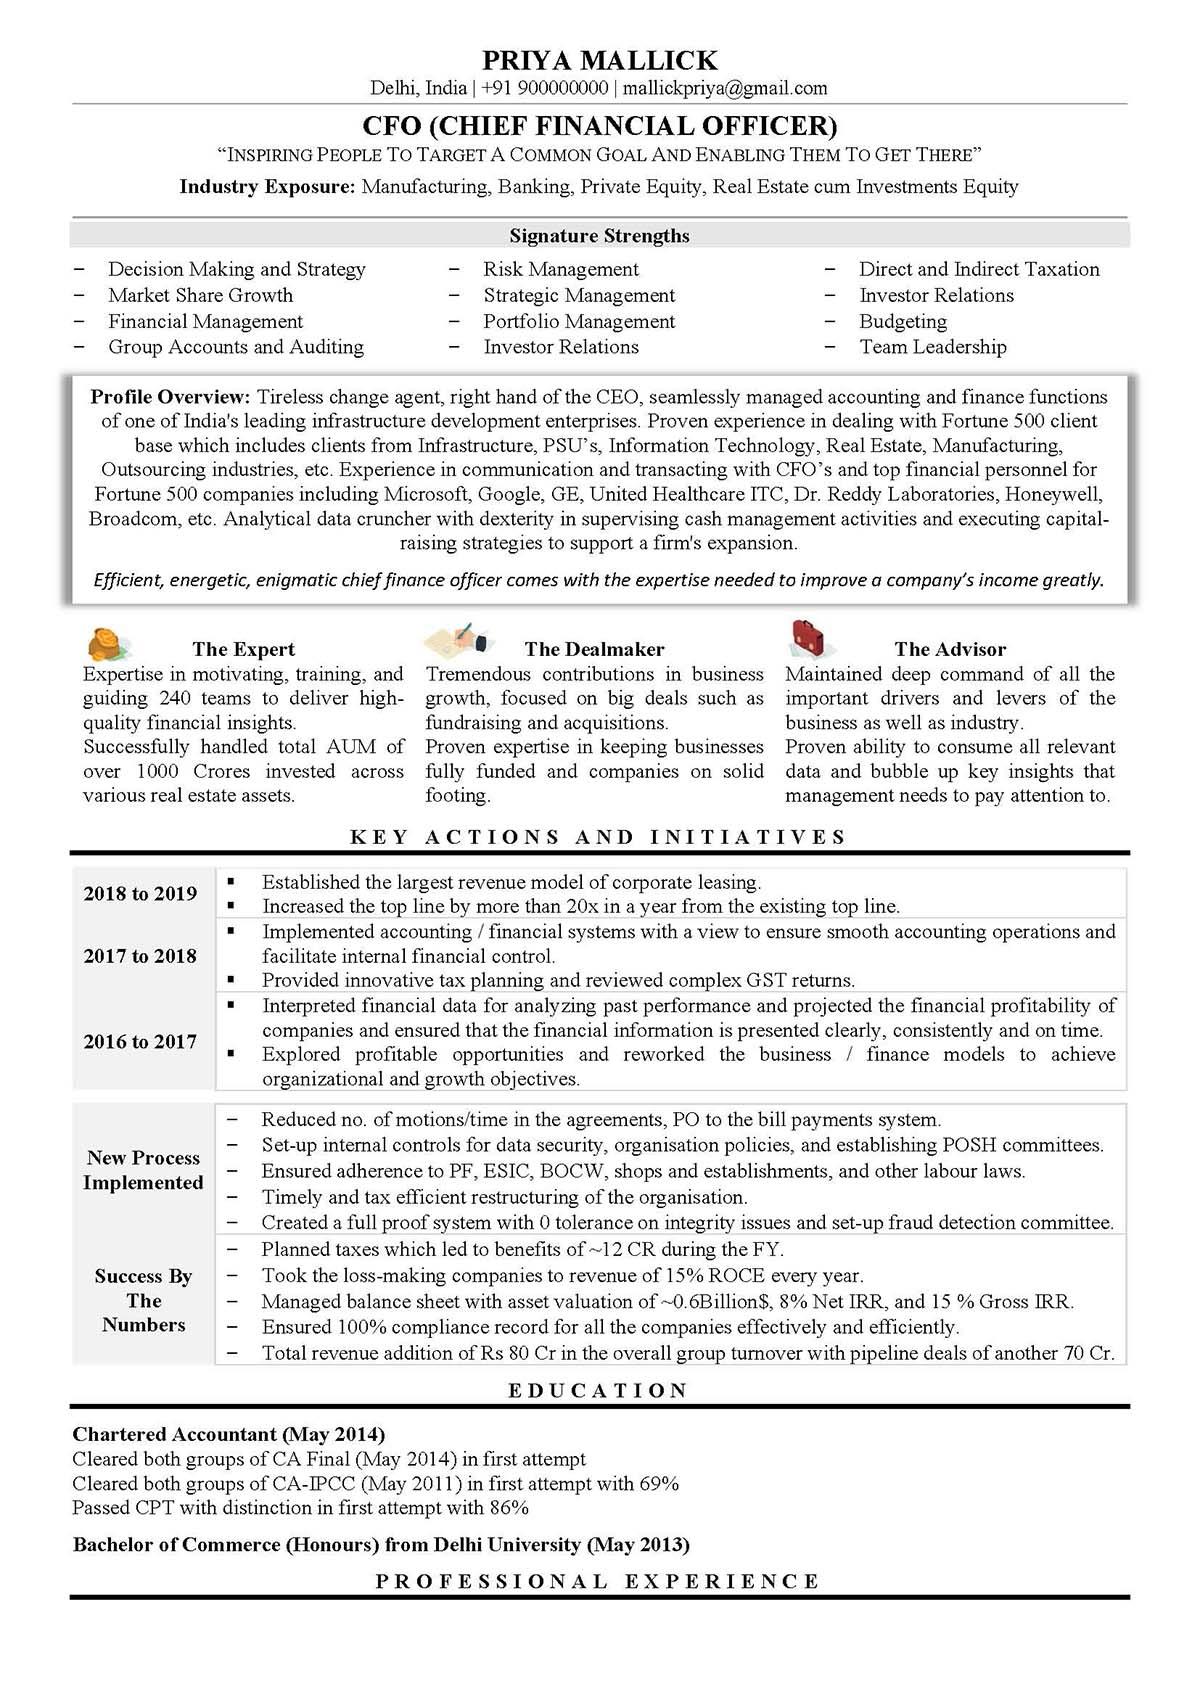 Sample resume: Business Administration and Management, High Experience, Functional